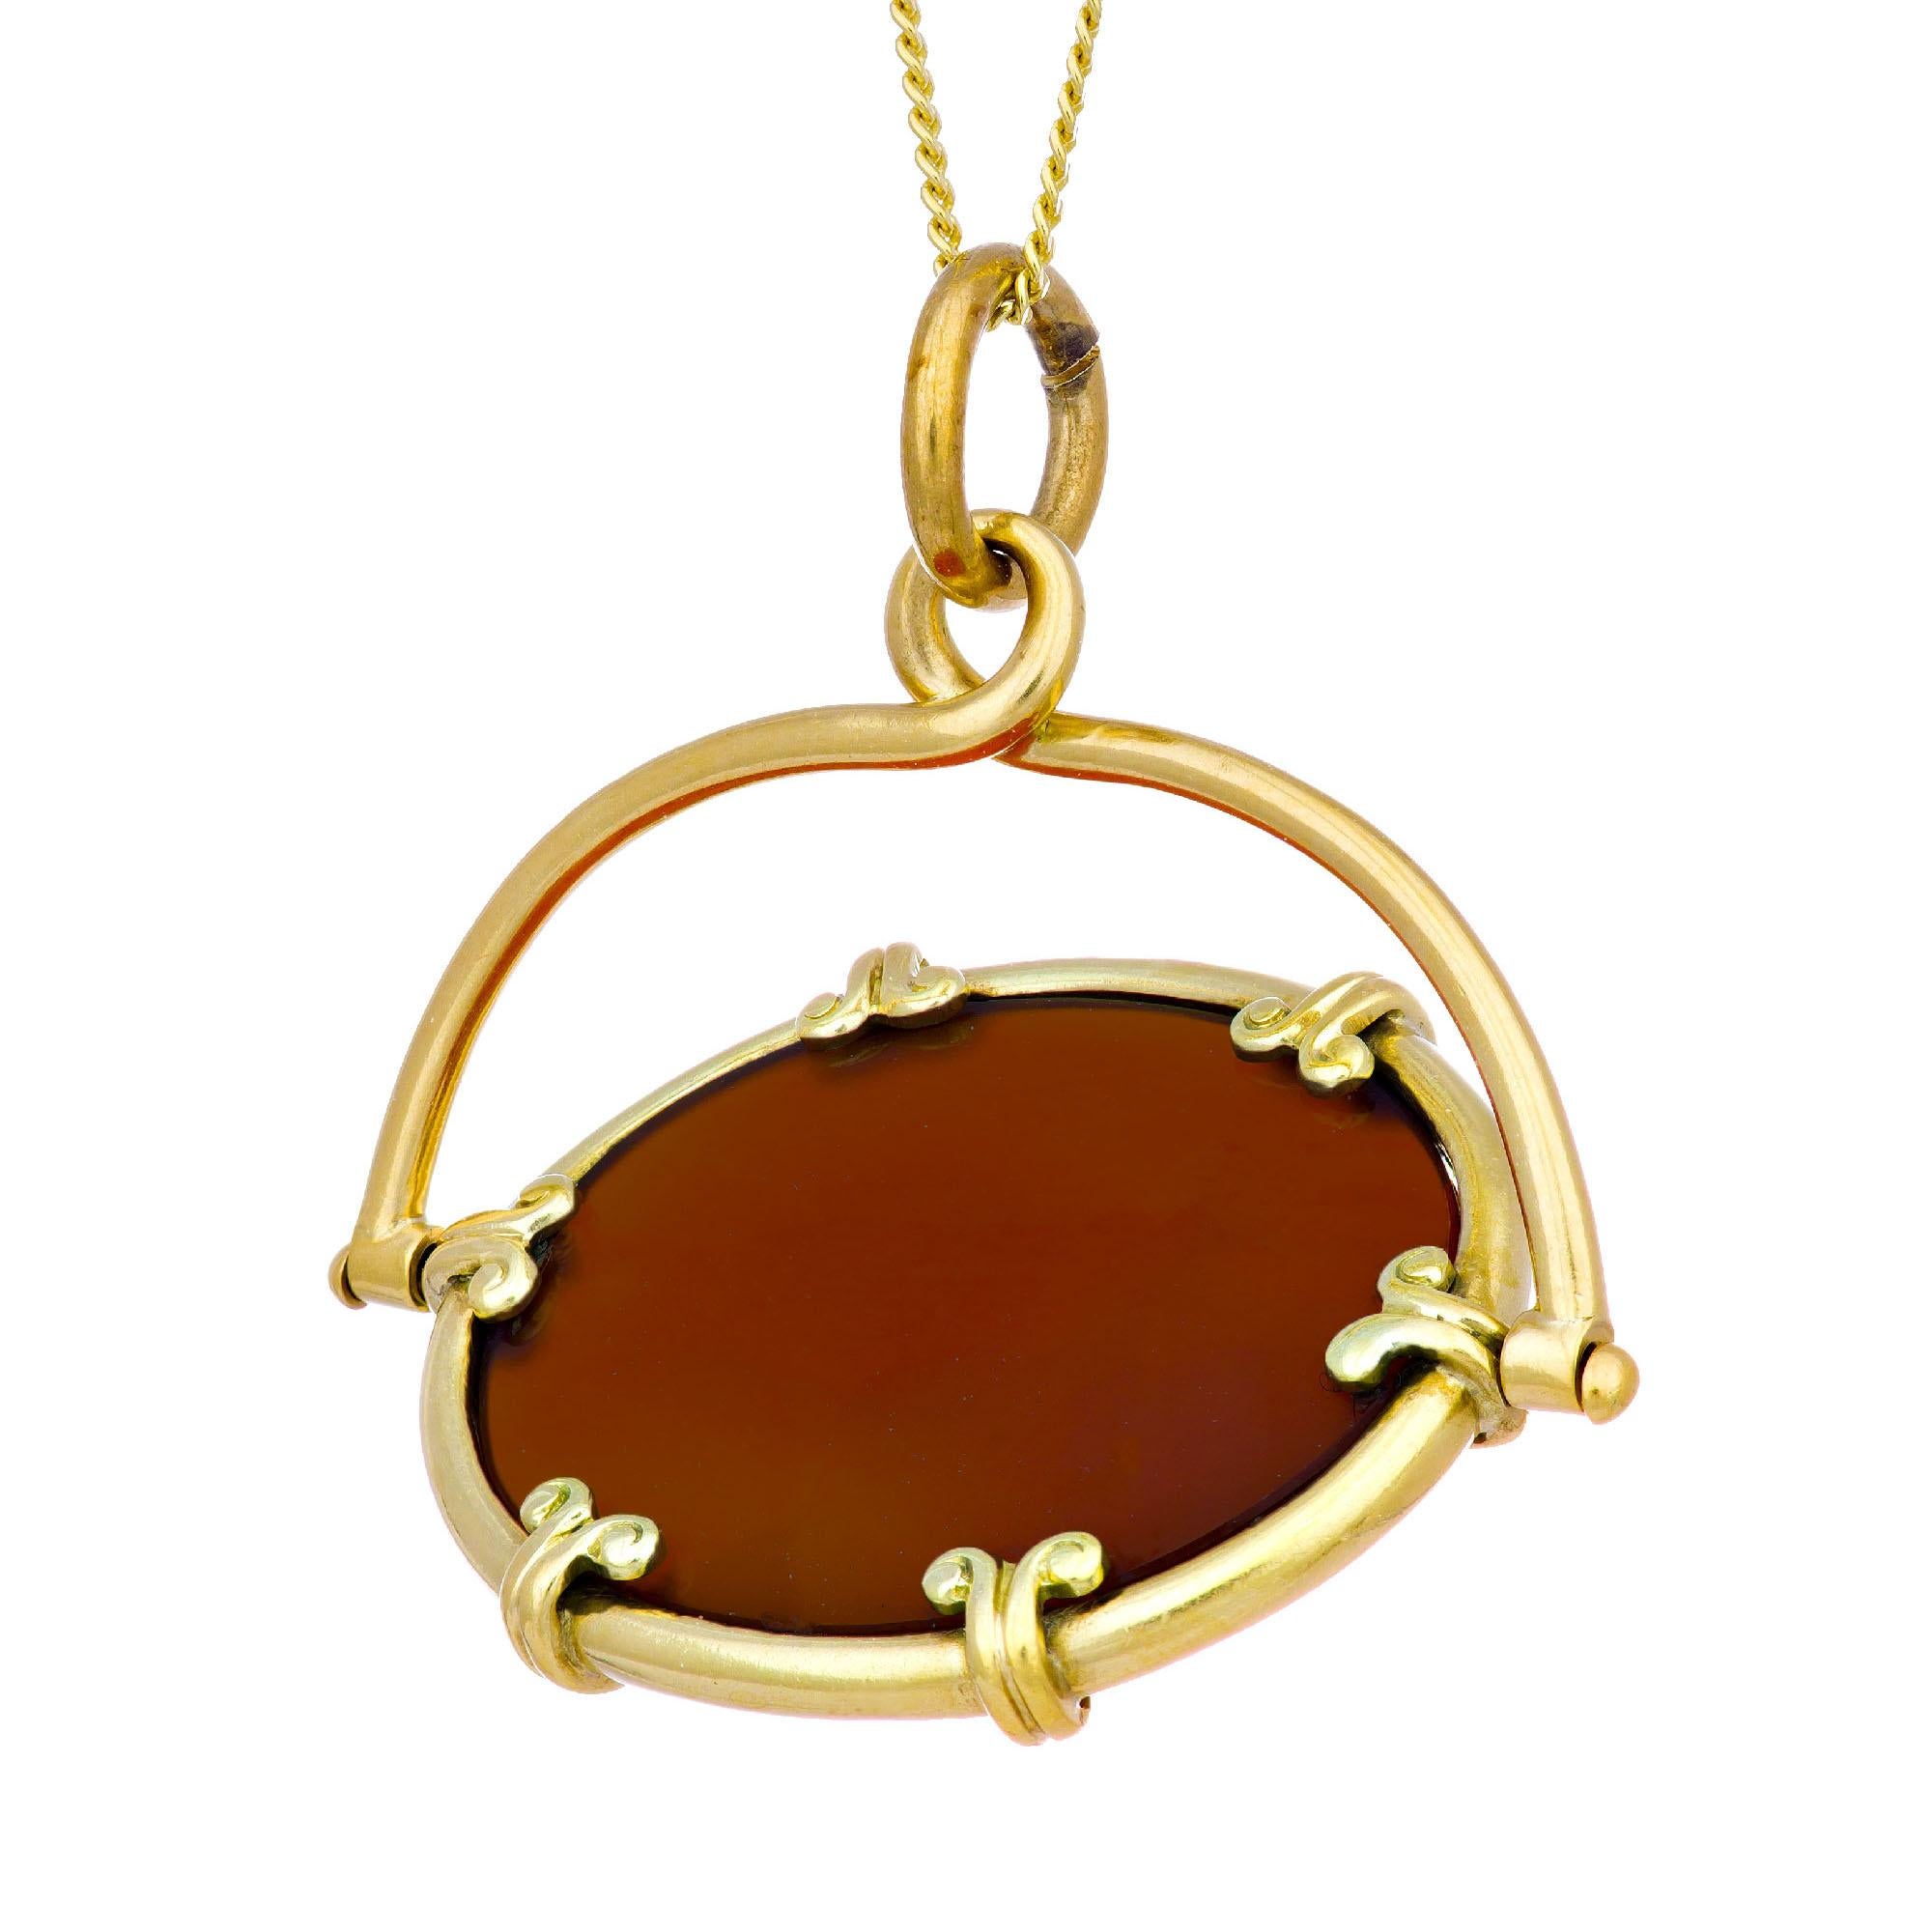 Early 1900's carnelian 14k yellow gold watch fob pendant necklace. Oval center carnelian in 14k yellow gold on an 16 inch chain. 

1 oval reddish orange cabochon carnelian 
14k yellow gold 
Stamped: 14k
9.0 grams
Top to bottom: 33.6mm or 1 1/3